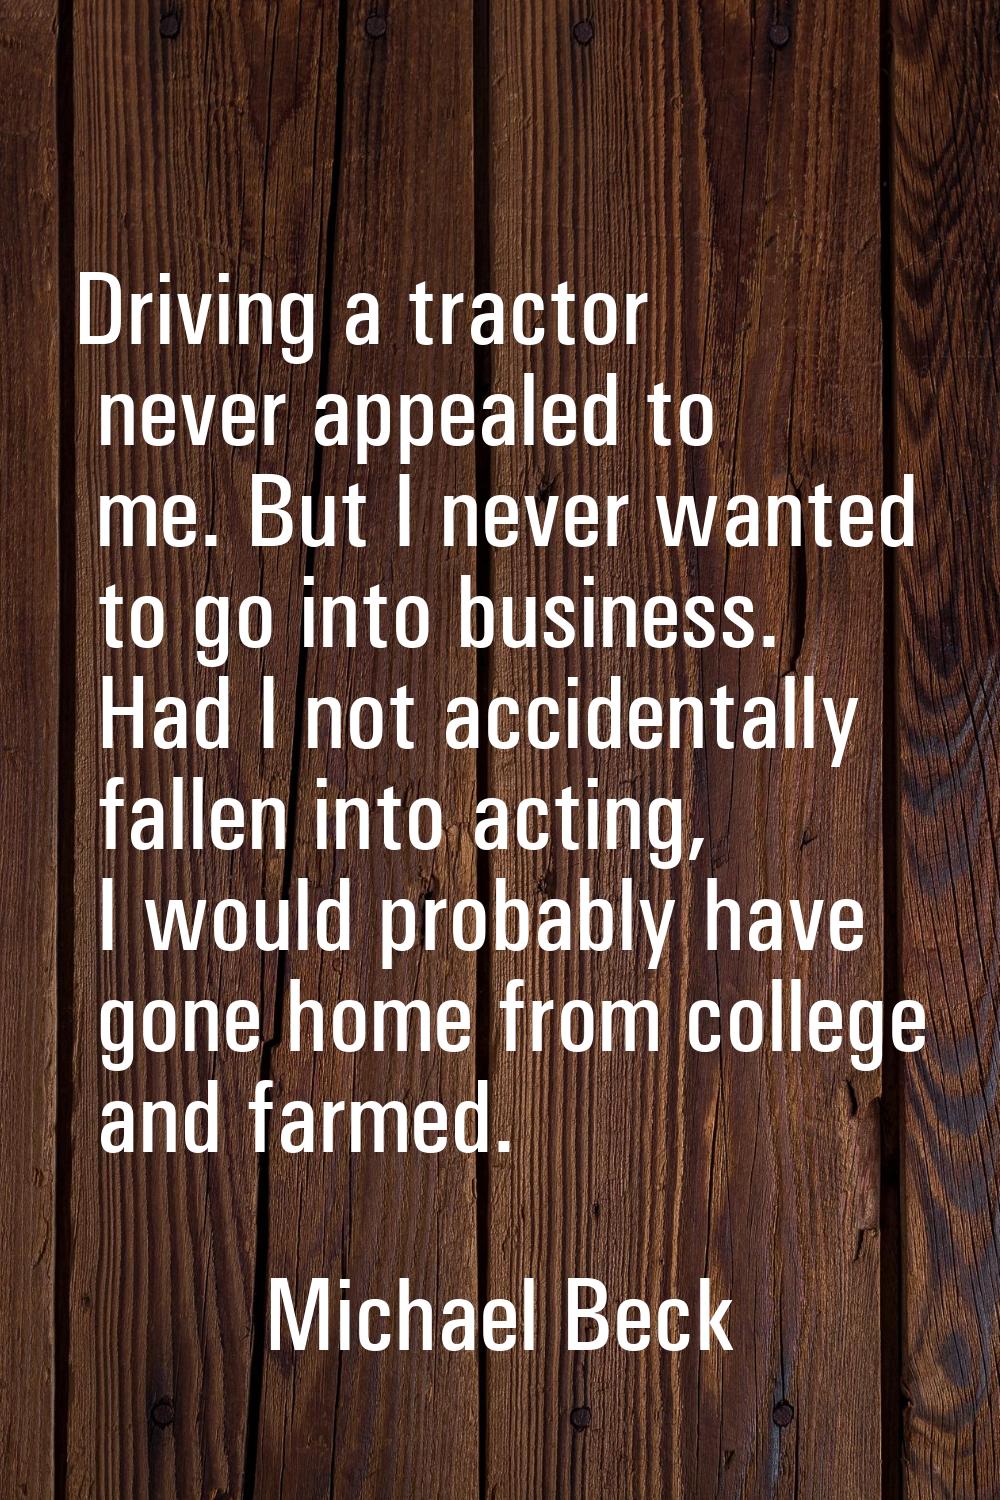 Driving a tractor never appealed to me. But I never wanted to go into business. Had I not accidenta